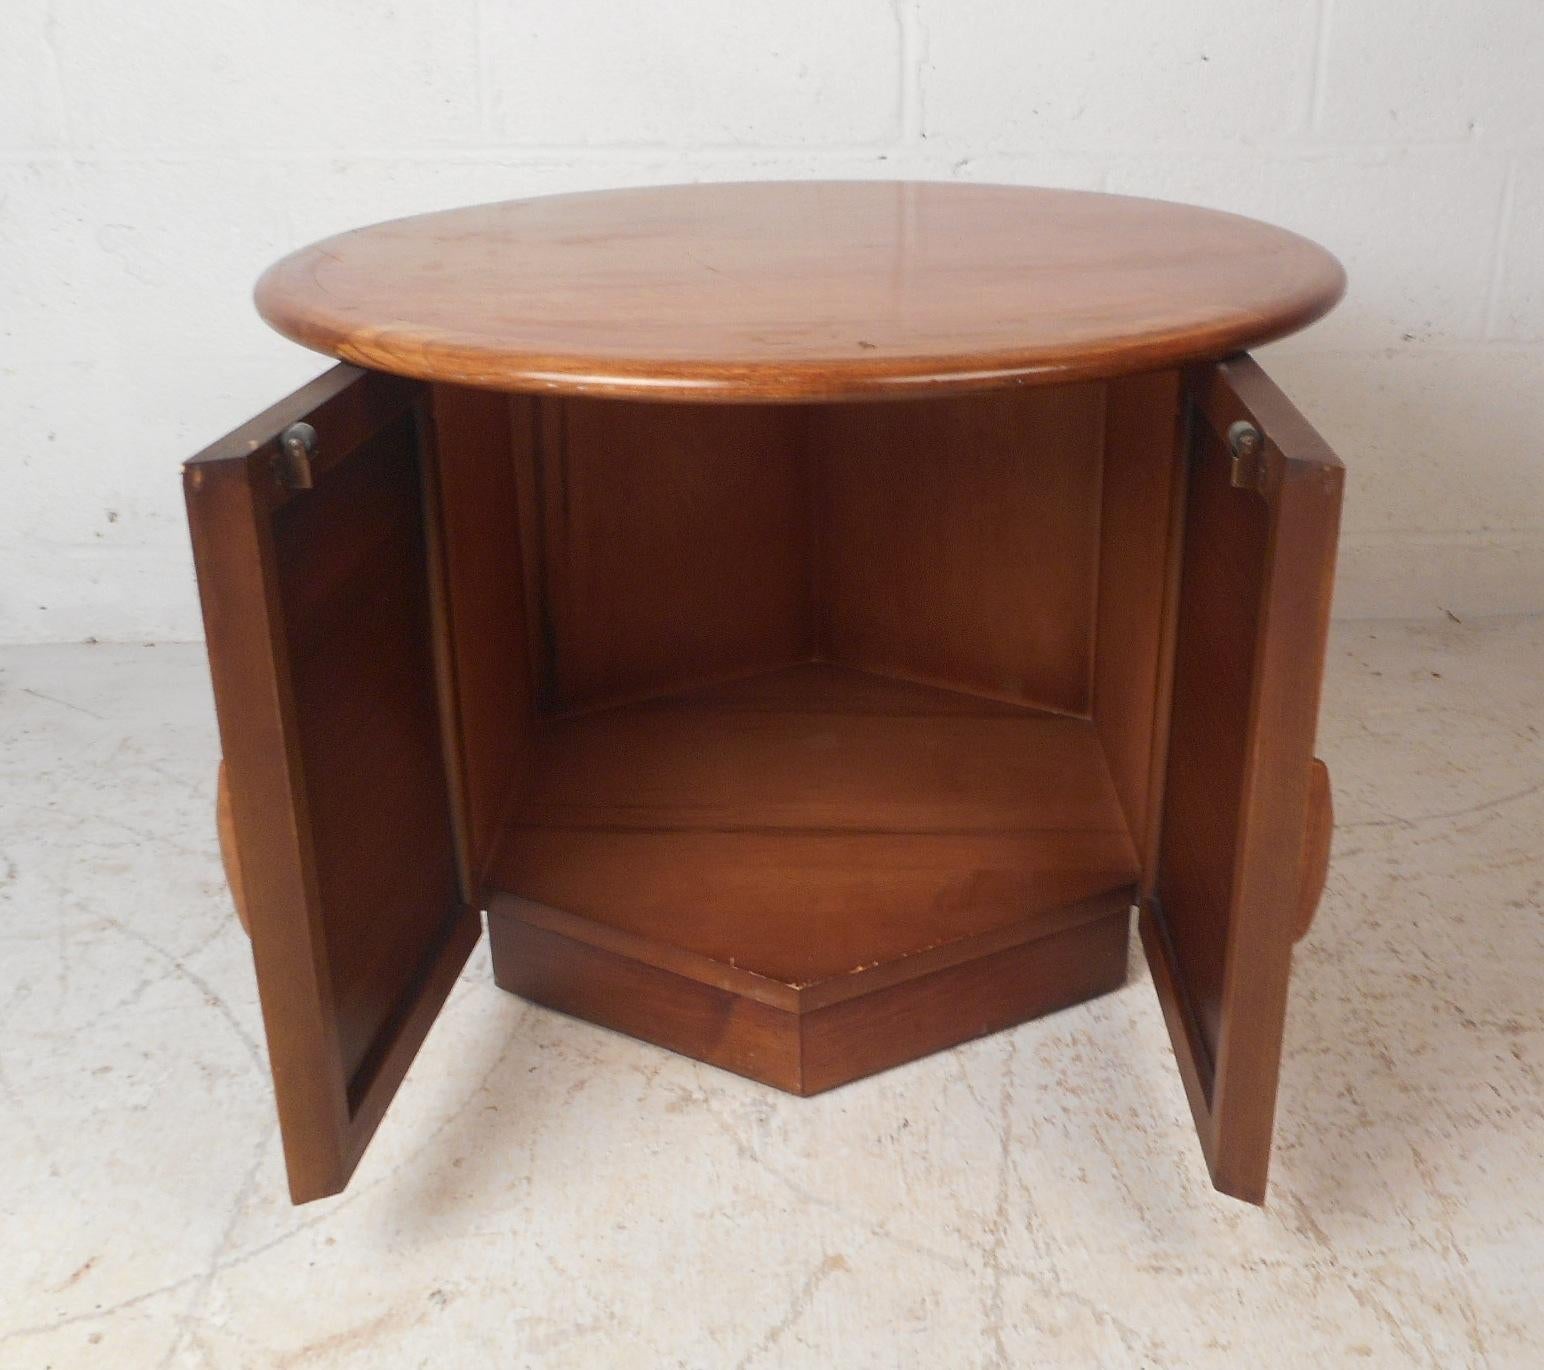 Late 20th Century Mid-Century Modern End Table by Lane Furniture